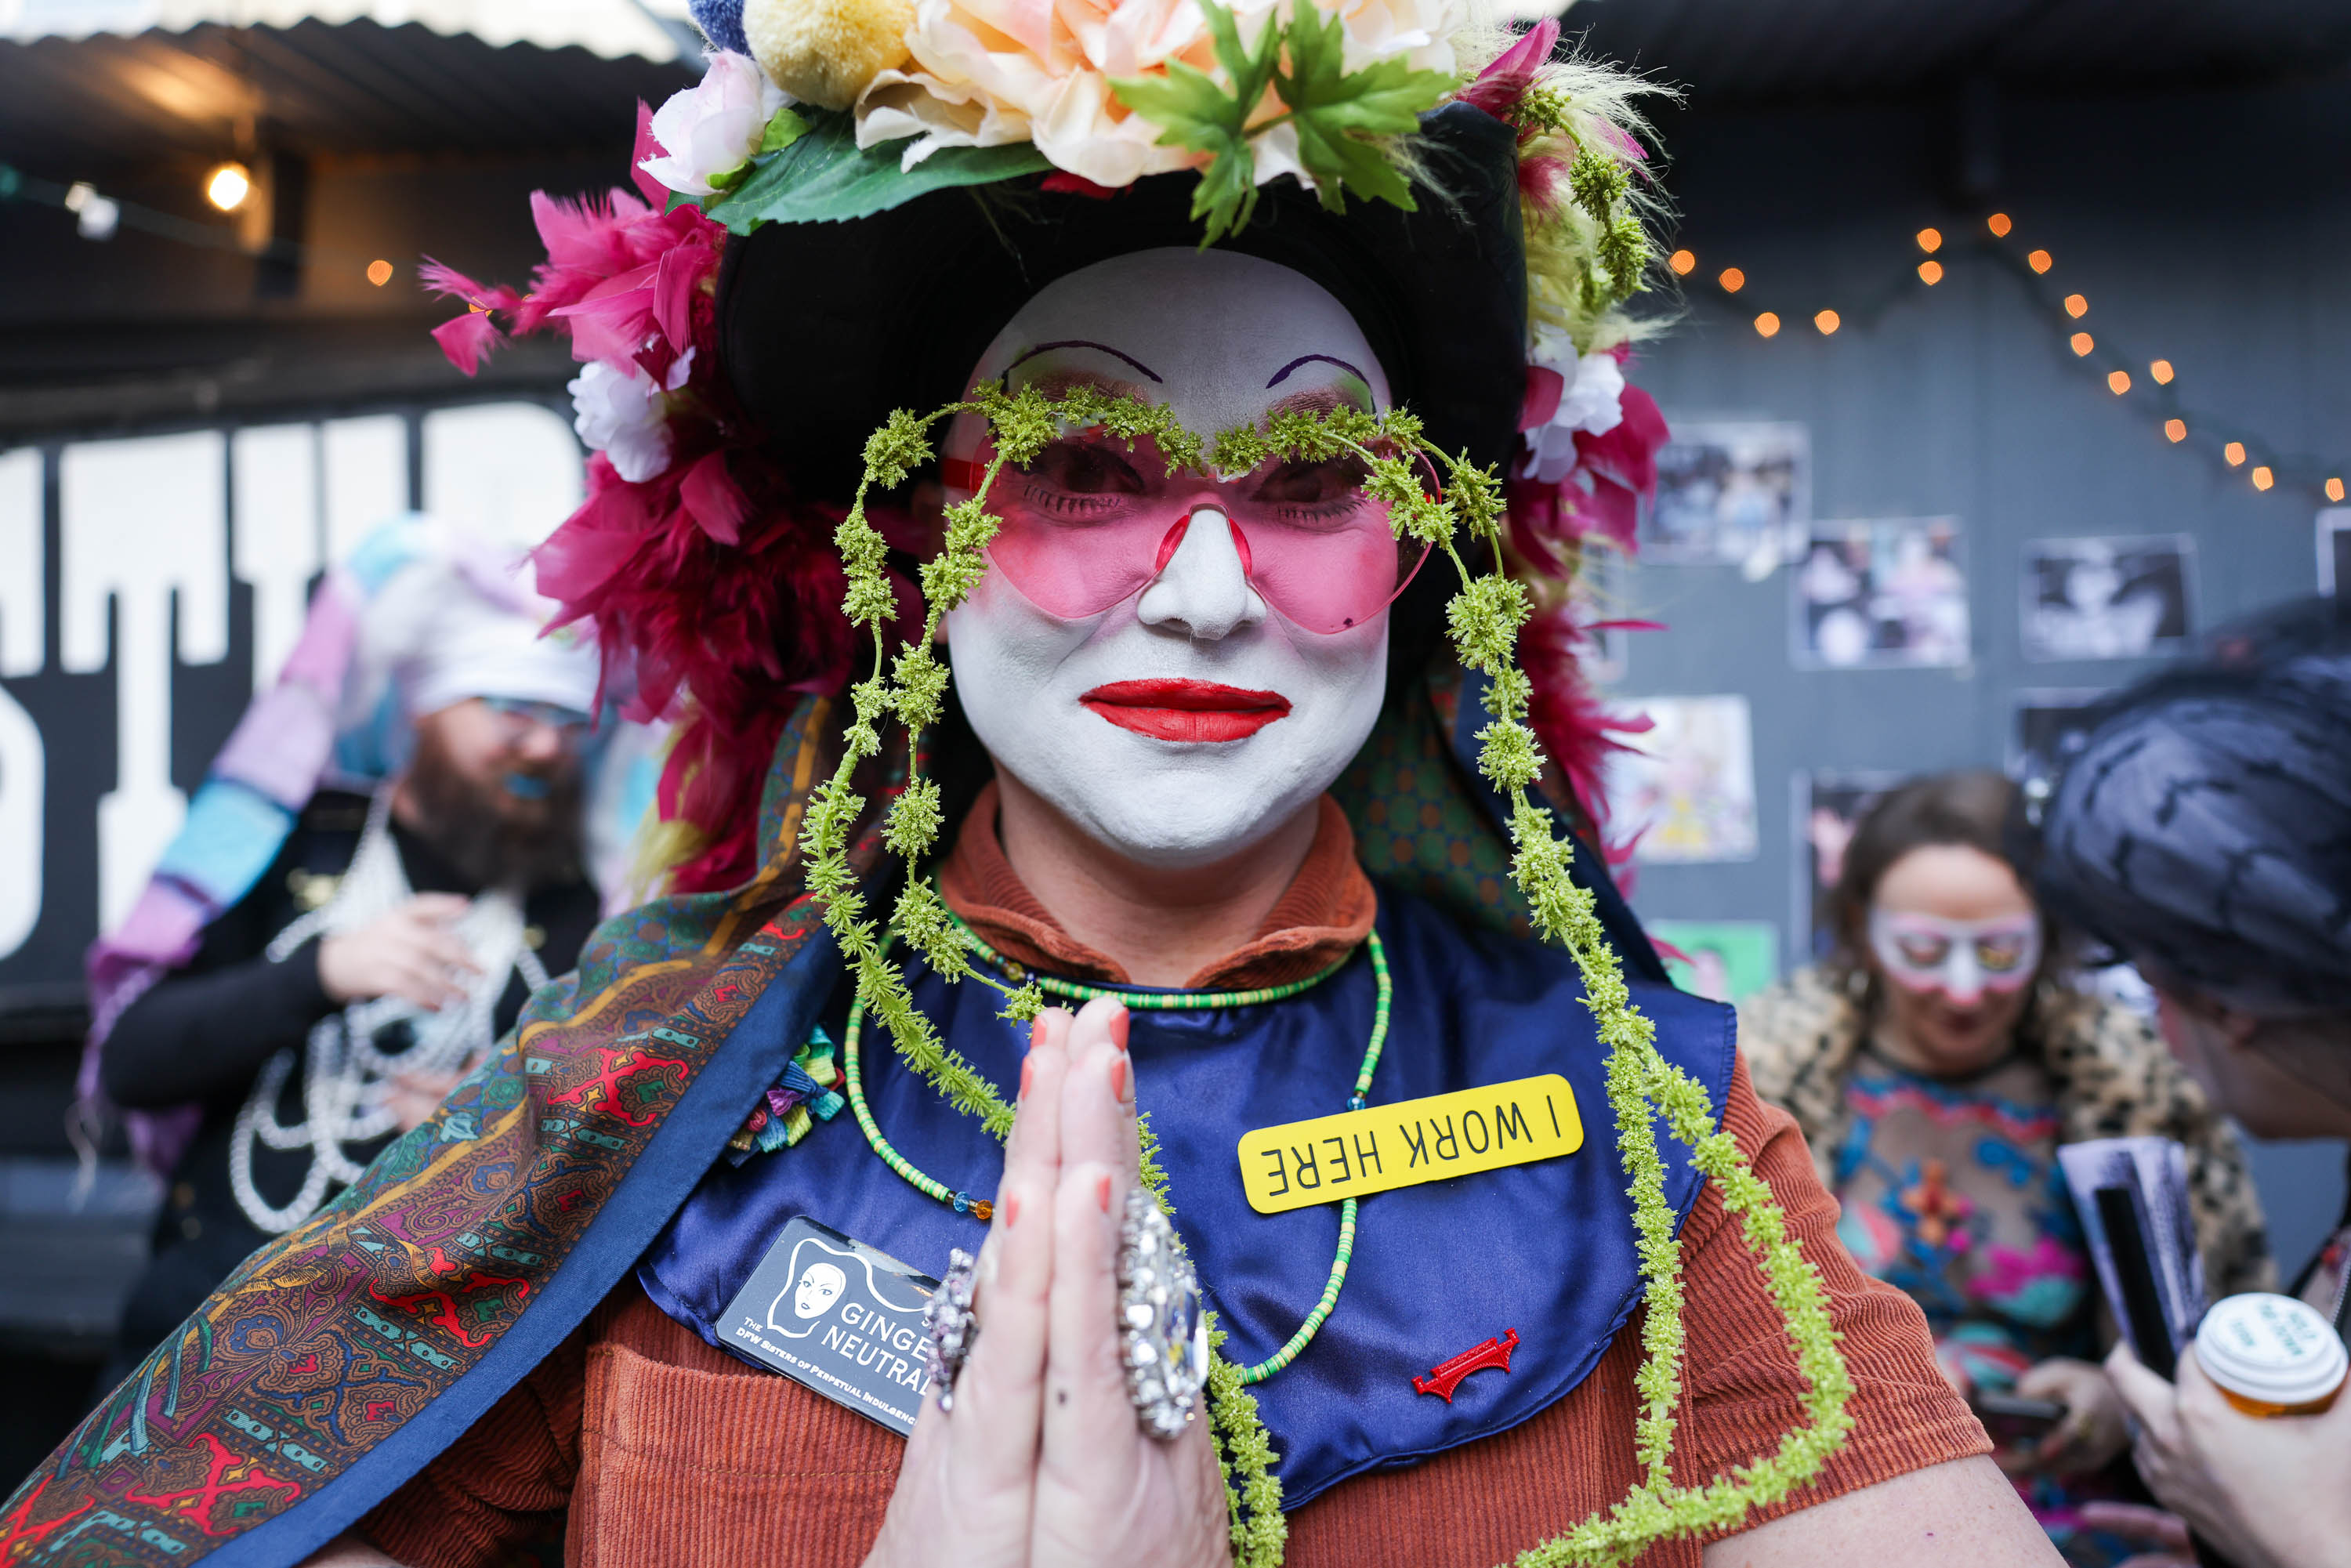 a Sister of Perpetual Indulgence nun in a flowery had, pink sunglasses and whiteface makeup